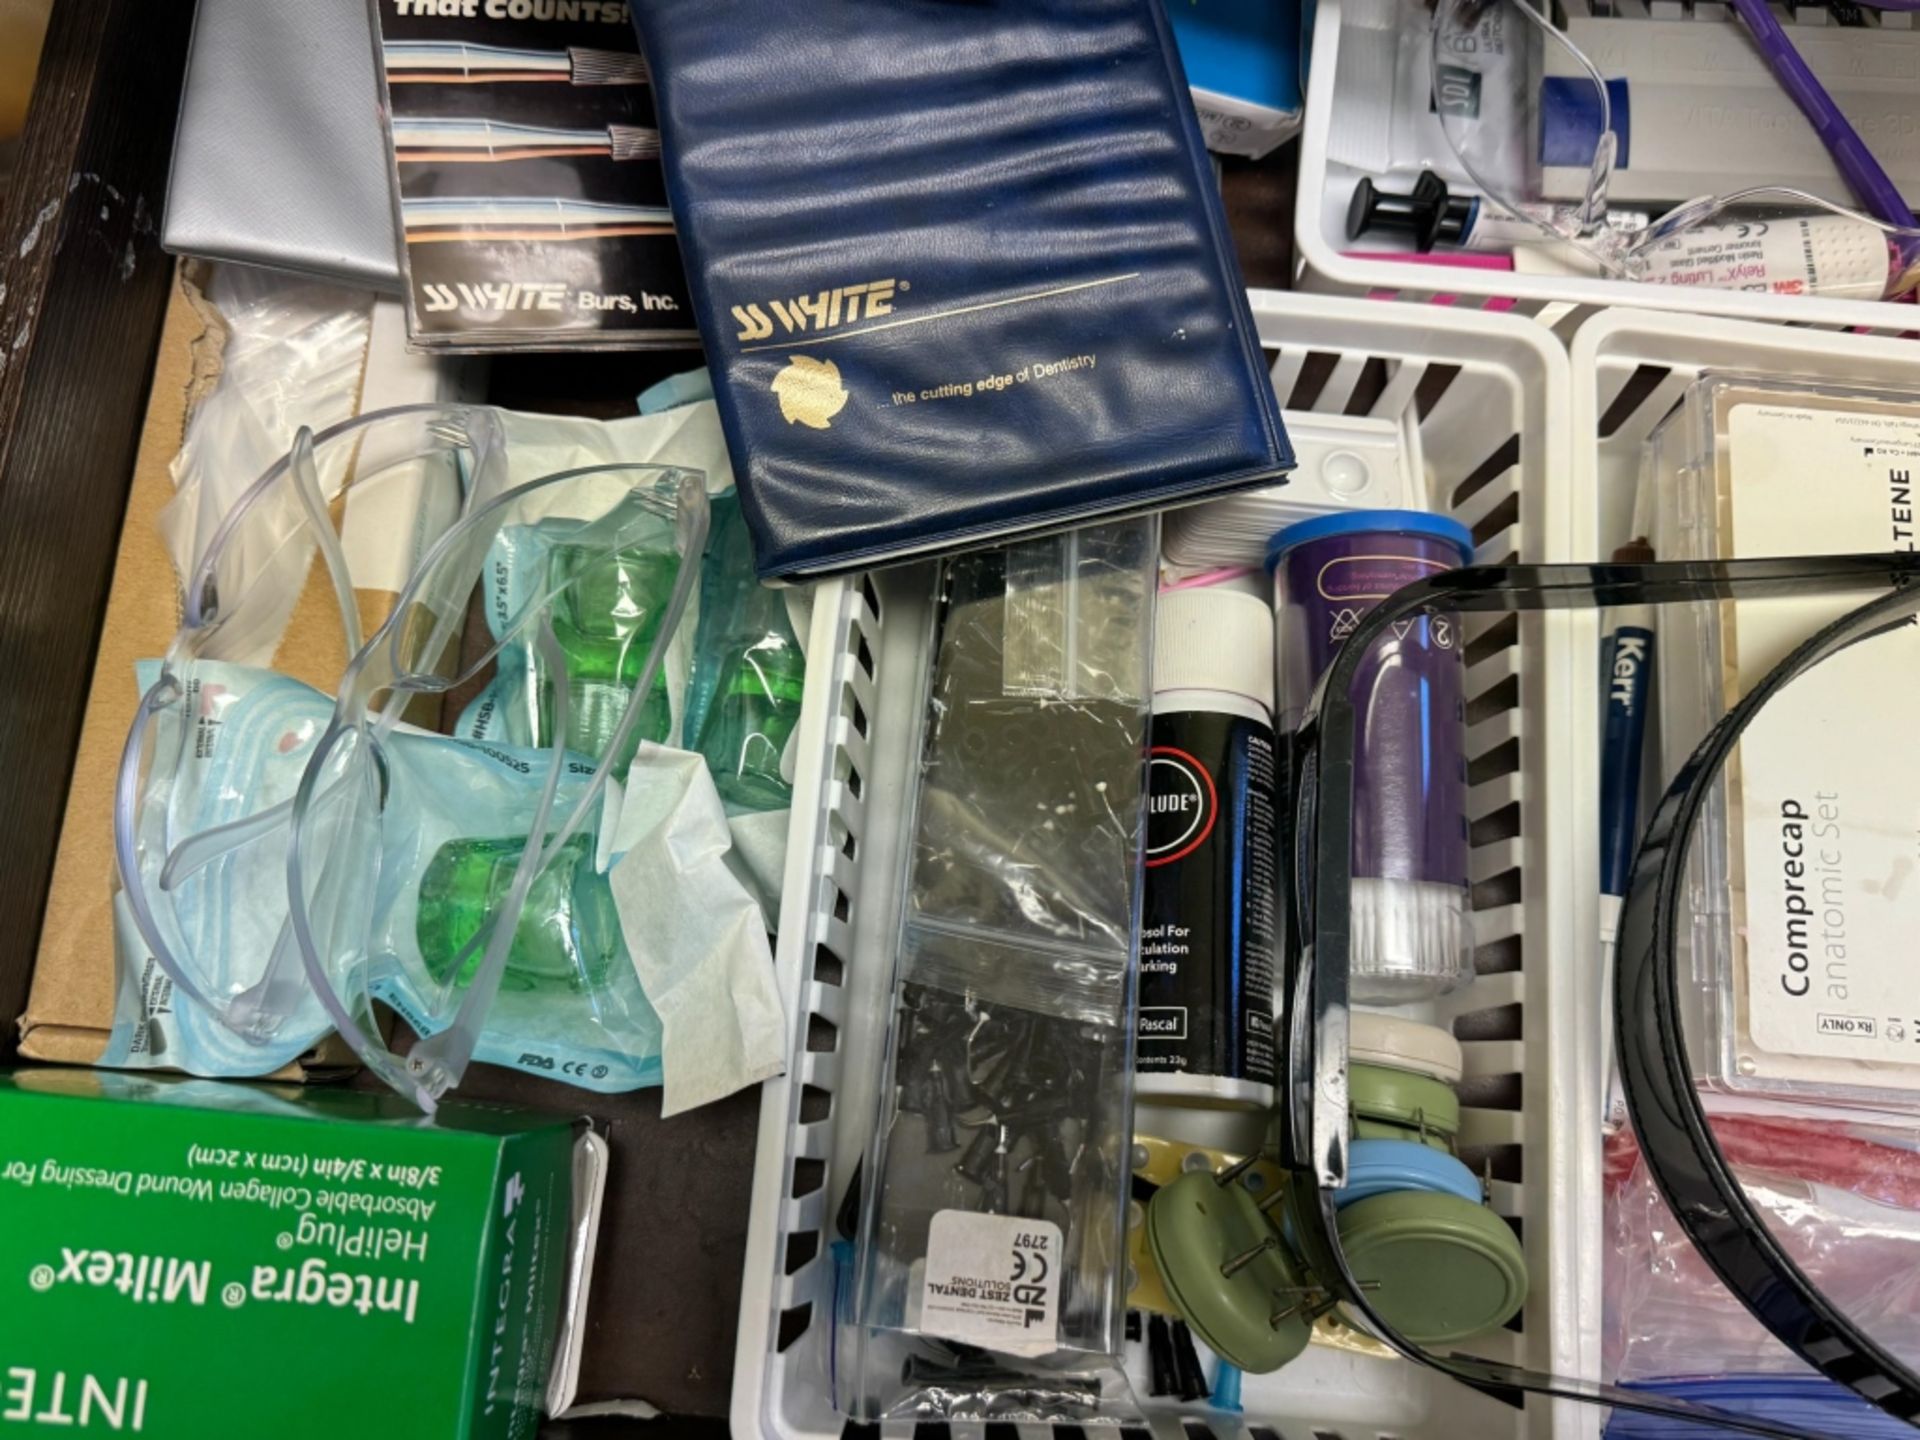 LOT CONSISTING OF DENTAL SUPPLIES IN CABINET - Image 4 of 4